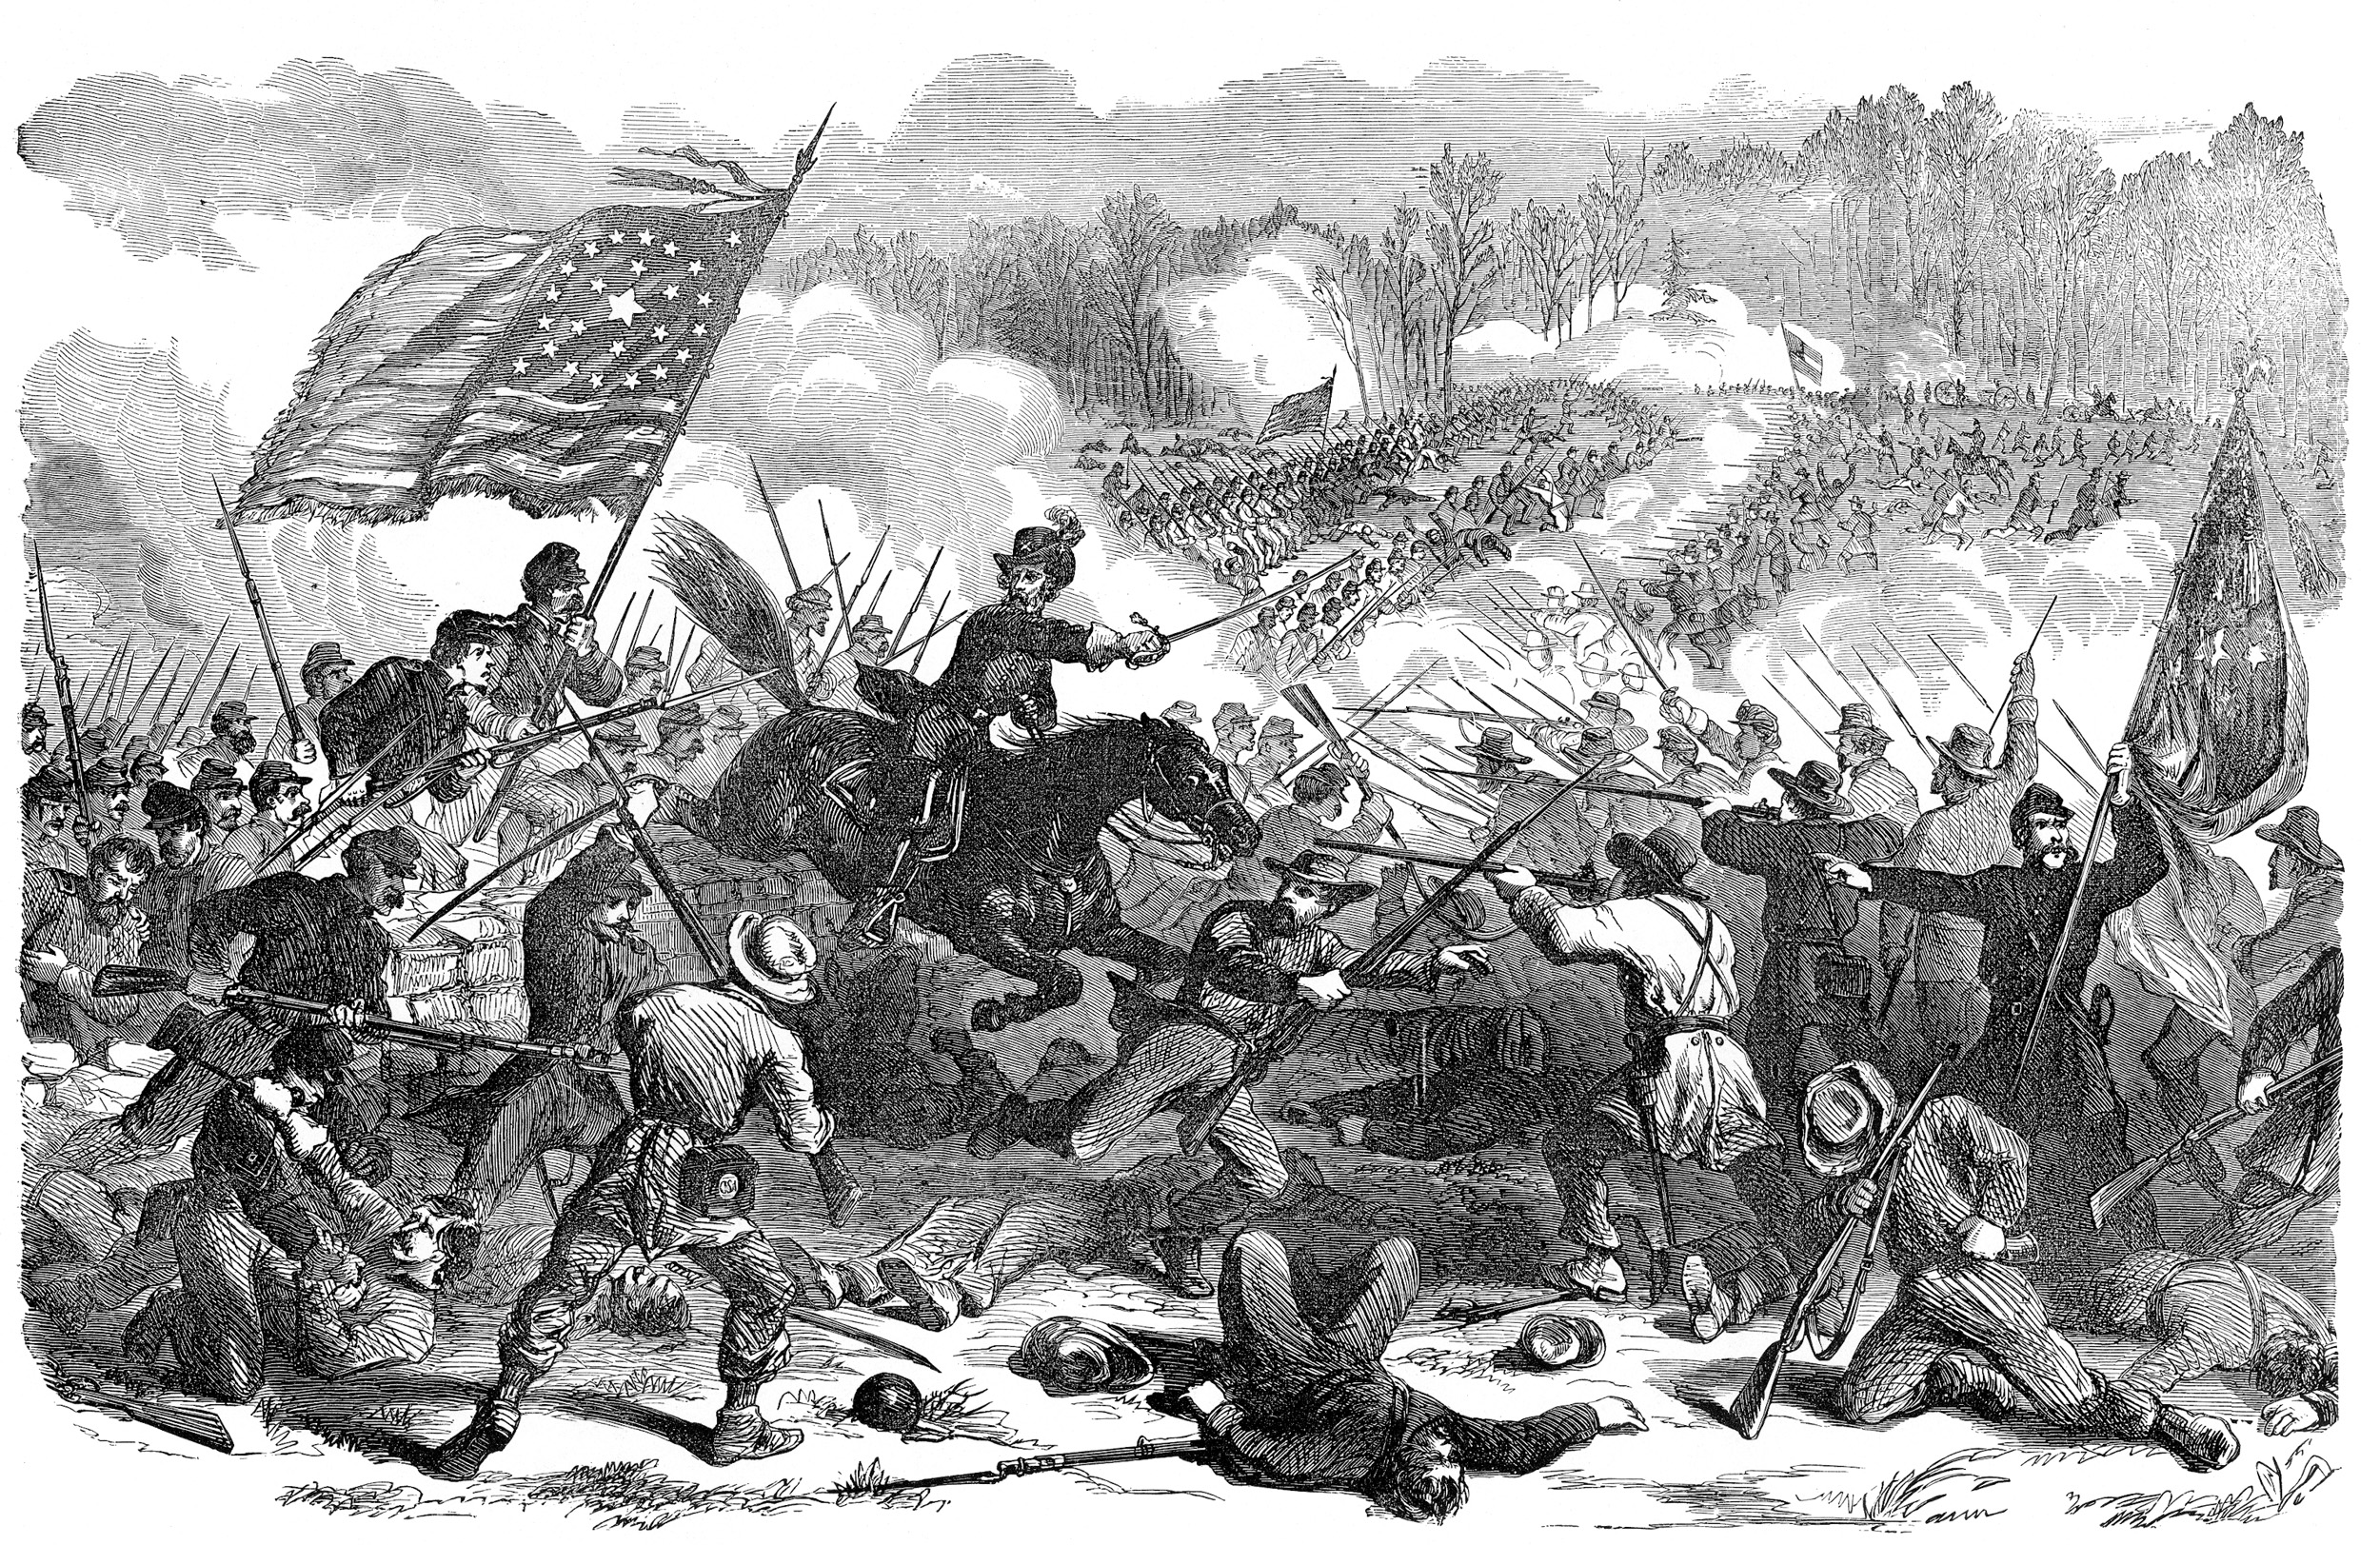 Union and Confederate forces clashed time after time in the rich agricultural valley, prized by both sides for its food, livestock, and strategic position. 